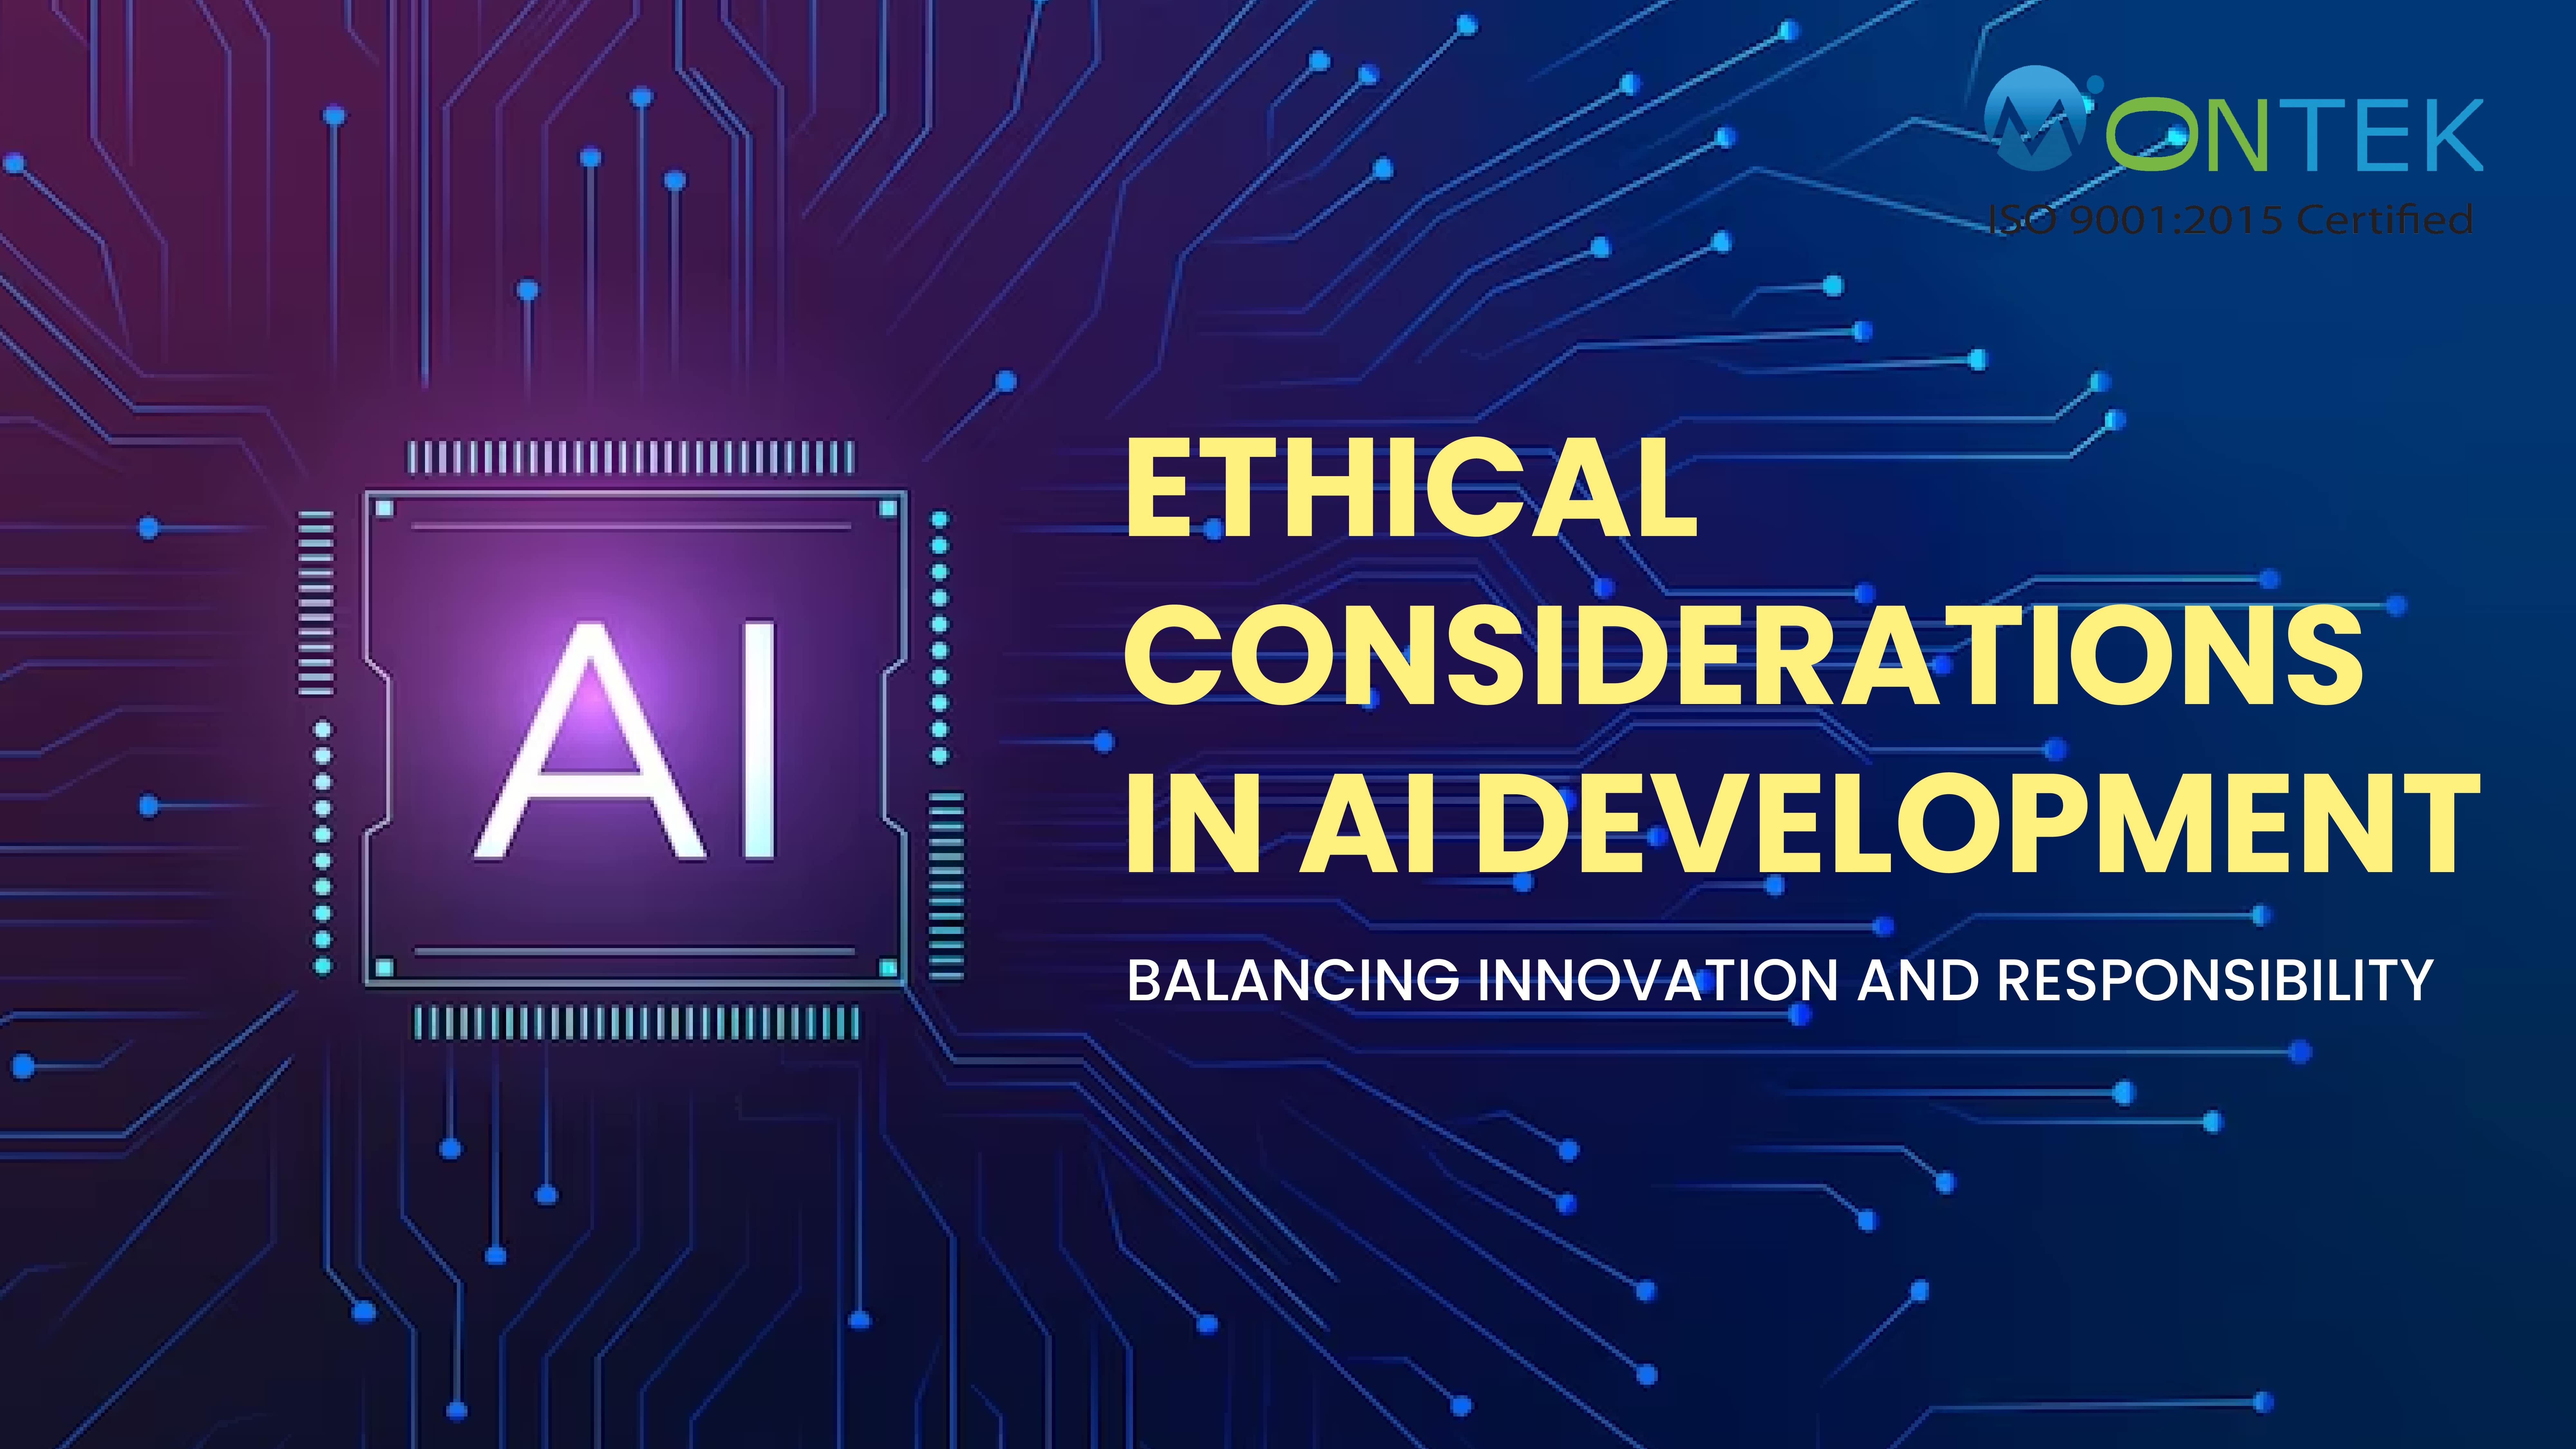 Ethical Considerations in AI Development Balancing Innovation and Responsibility